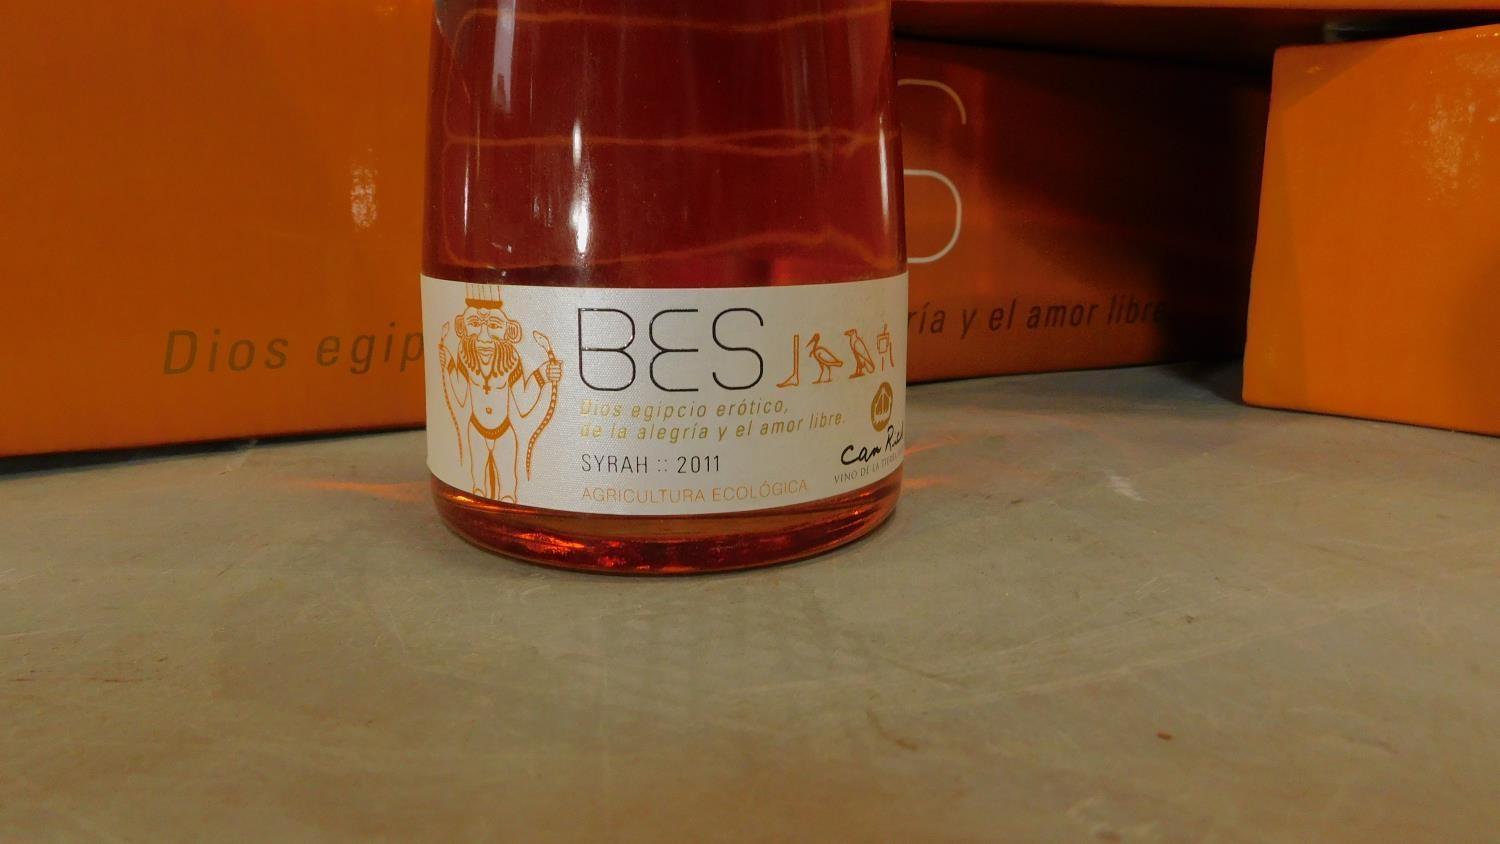 Three half case boxes of BES - Can Rich Syrah 2011 wine. (18 bottles). - Image 3 of 3